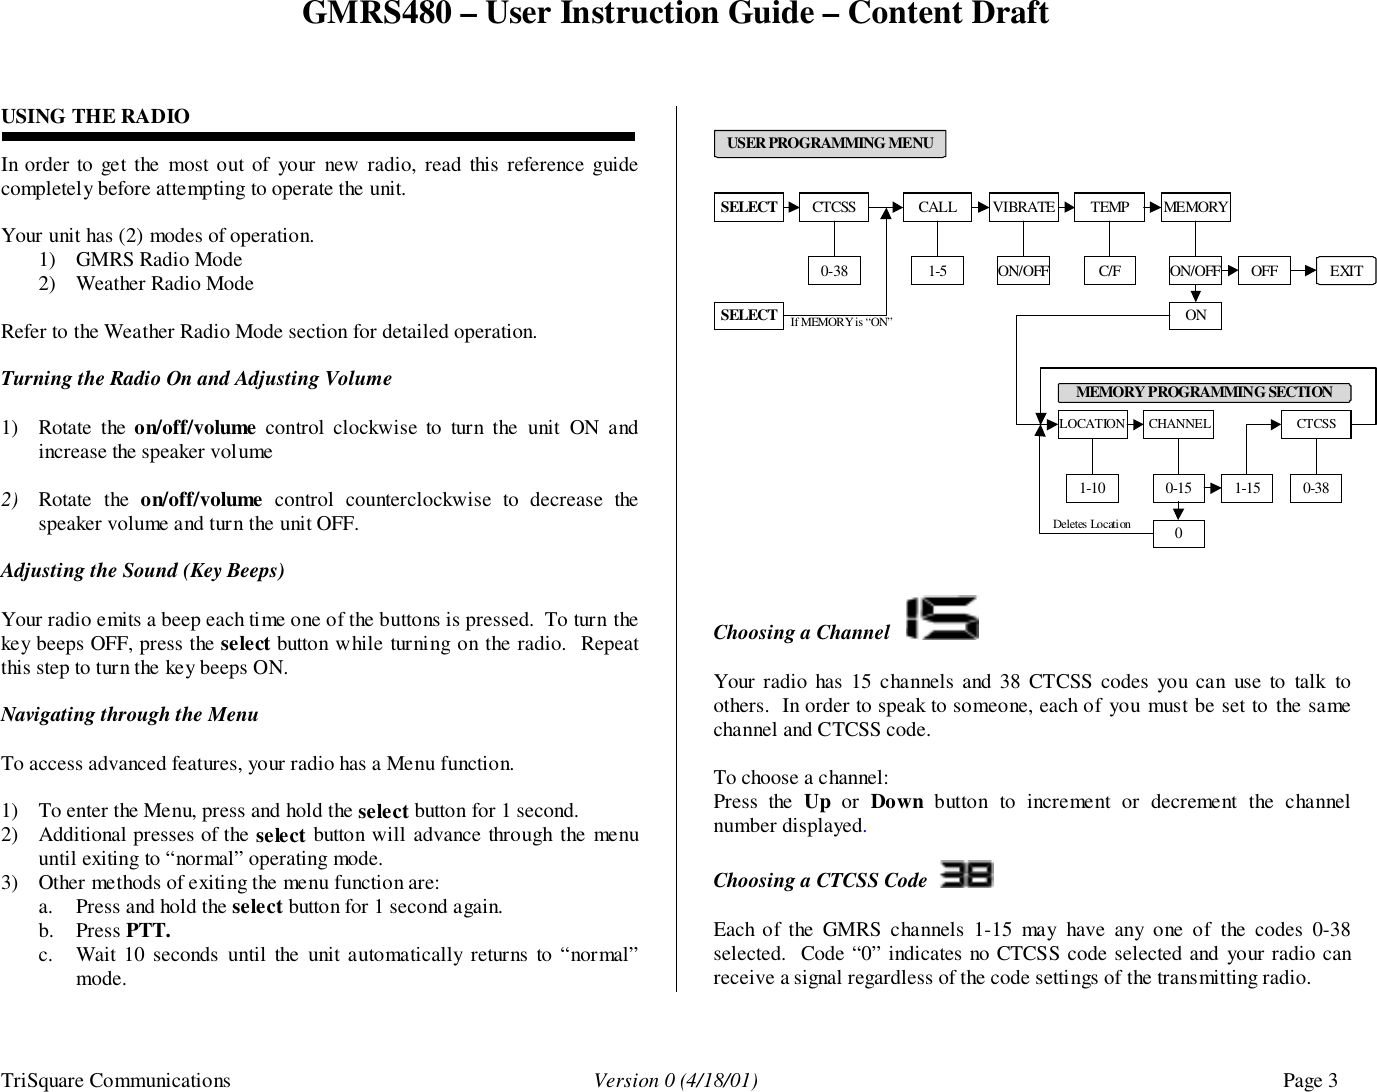 GMRS480 – User Instruction Guide – Content DraftTriSquare Communications Version 0 (4/18/01) Page 3USING THE RADIOIn order to get the most out of your new radio, read this reference guidecompletely before attempting to operate the unit.Your unit has (2) modes of operation.1) GMRS Radio Mode2) Weather Radio ModeRefer to the Weather Radio Mode section for detailed operation.Turning the Radio On and Adjusting Volume1) Rotate the on/off/volume control clockwise to turn the unit ON andincrease the speaker volume2) Rotate the on/off/volume control counterclockwise to decrease thespeaker volume and turn the unit OFF.Adjusting the Sound (Key Beeps)Your radio emits a beep each time one of the buttons is pressed.  To turn thekey beeps OFF, press the select button while turning on the radio.  Repeatthis step to turn the key beeps ON.Navigating through the MenuTo access advanced features, your radio has a Menu function.1) To enter the Menu, press and hold the select button for 1 second.2) Additional presses of the select button will advance through the menuuntil exiting to “normal” operating mode.3) Other methods of exiting the menu function are:a. Press and hold the select button for 1 second again.b. Press PTT.c. Wait 10 seconds until the unit automatically returns to “normal”mode.SELECT CTCSS CALL VIBRATEEXIT0-38 1-5 ON/OFFTEMPC/FMEMORYON/OFF OFFONLOCATION1-100USER PROGRAMMING MENUCHANNEL0-15CTCSS0-381-15MEMORY PROGRAMMING SECTIONDeletes LocationSELECT If MEMORY is “ON”Choosing a Channel   Your radio has 15 channels and 38 CTCSS codes you can use to talk toothers.  In order to speak to someone, each of you must be set to the samechannel and CTCSS code.To choose a channel:Press the Up or Down button to increment or decrement the channelnumber displayed.  Choosing a CTCSS Code  Each of the GMRS channels 1-15 may have any one of the codes 0-38selected.  Code “0” indicates no CTCSS code selected and your radio canreceive a signal regardless of the code settings of the transmitting radio.